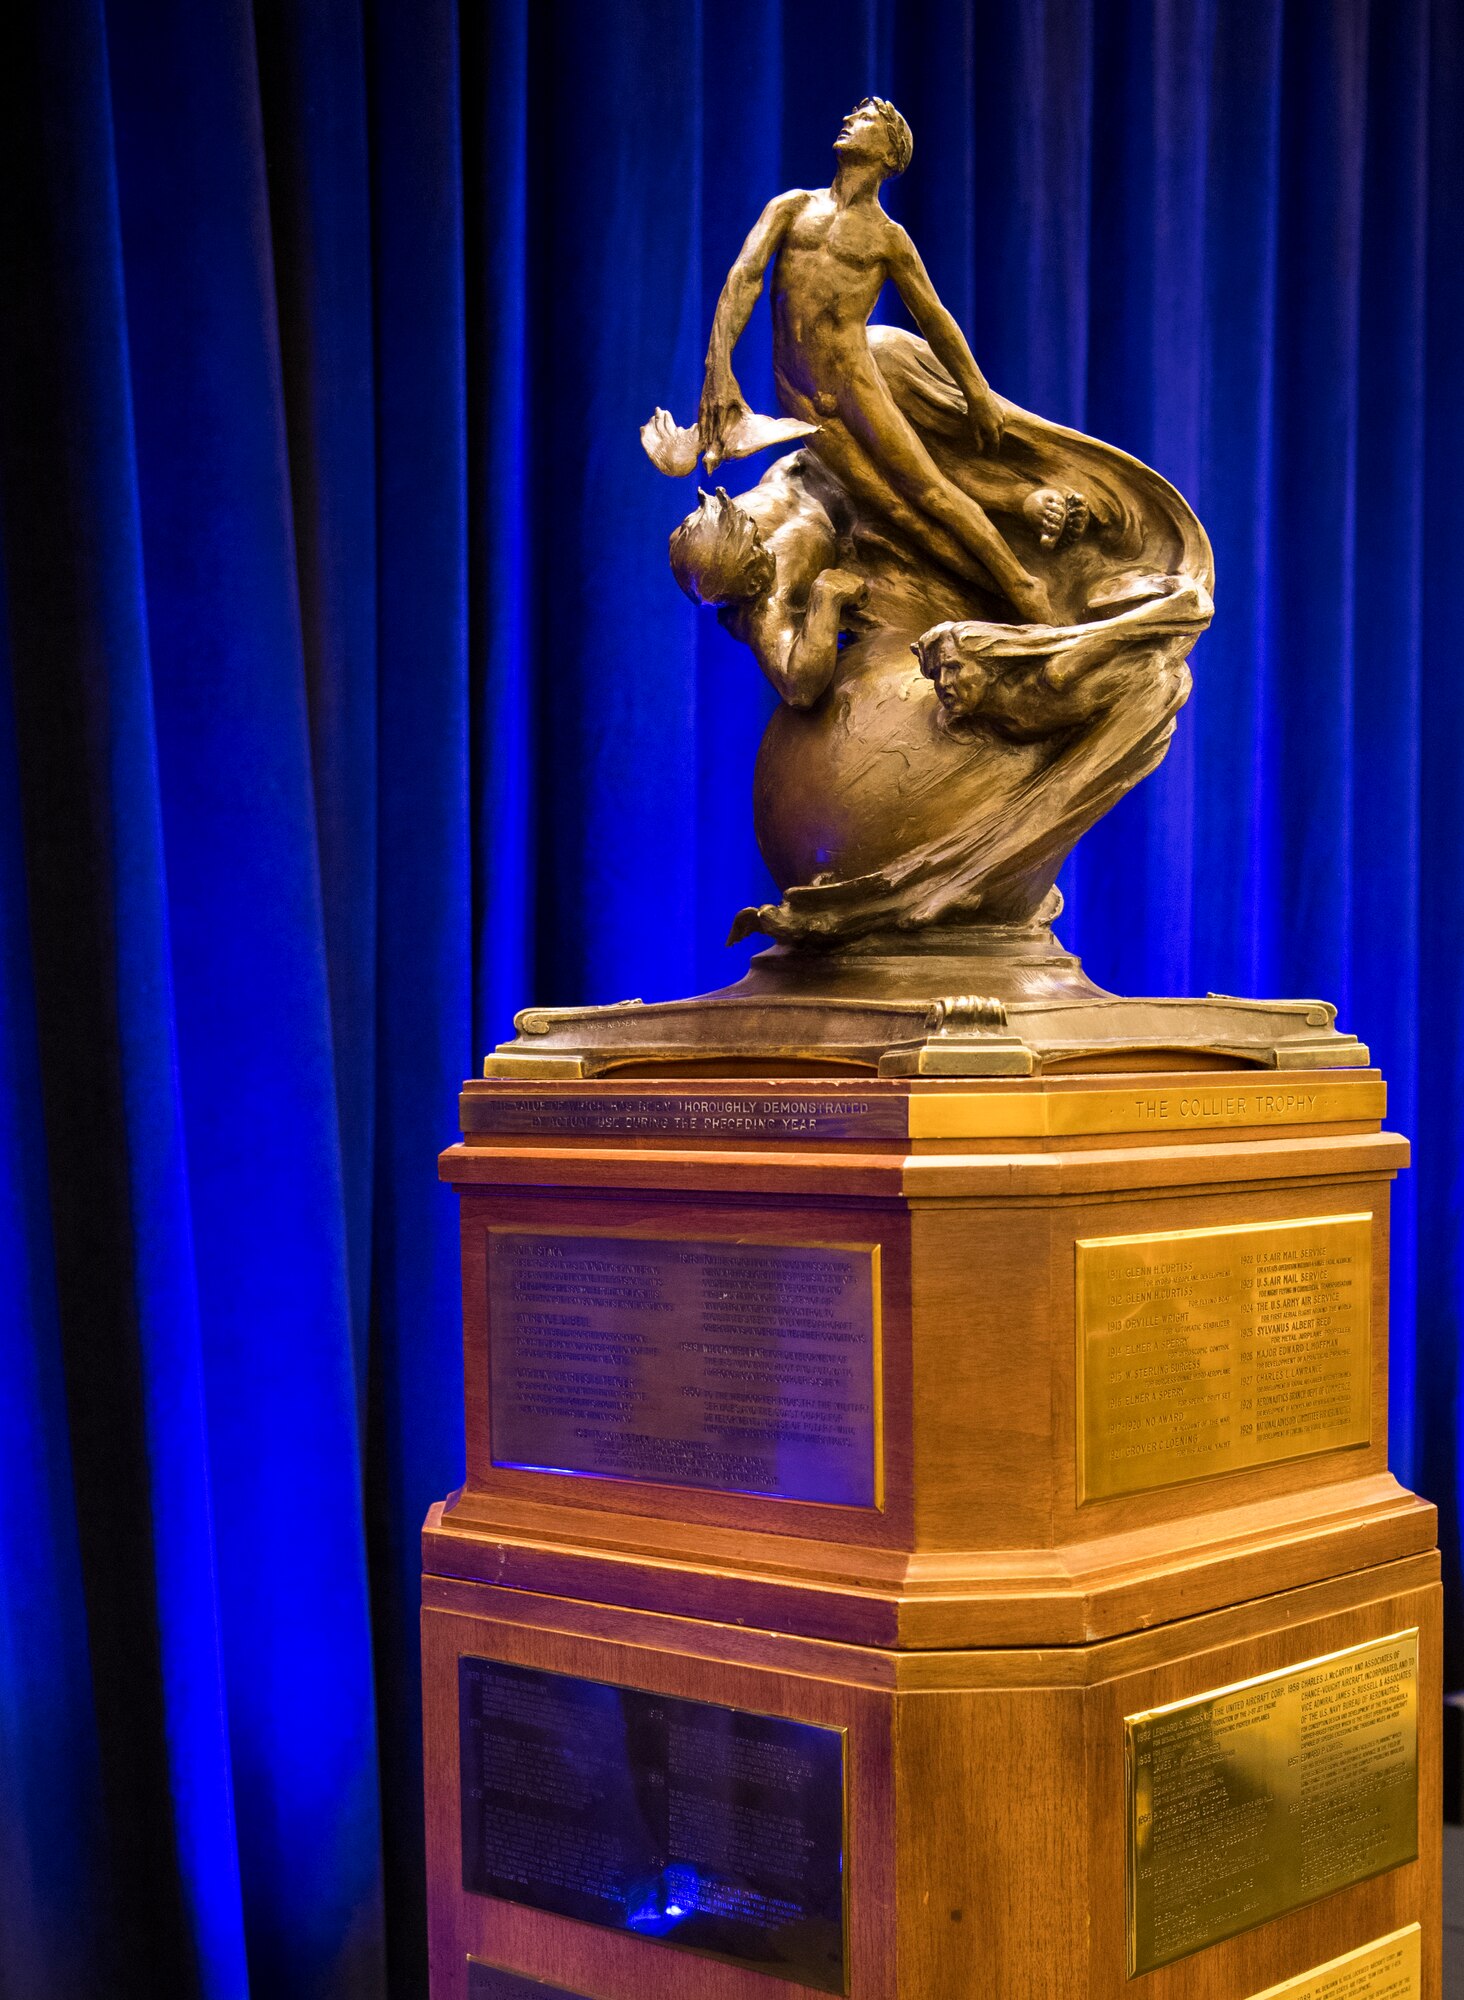 The Collier Trophy was established in 1911 by Robert J. Collier, publisher and early President of the Aero Club of America, Washington, June 13, 2019. The Collier Trophy is awarded annually by the U.S. Aeronautic Association "for the greatest achievement in aeronautics or astronautics in America, with respect to improving the performance, efficiency, and safety of air or space vehicles, the value of which has been thoroughly demonstrated by actual use during the preceding year."(U.S. Air Force photo by Christopher Dyer)